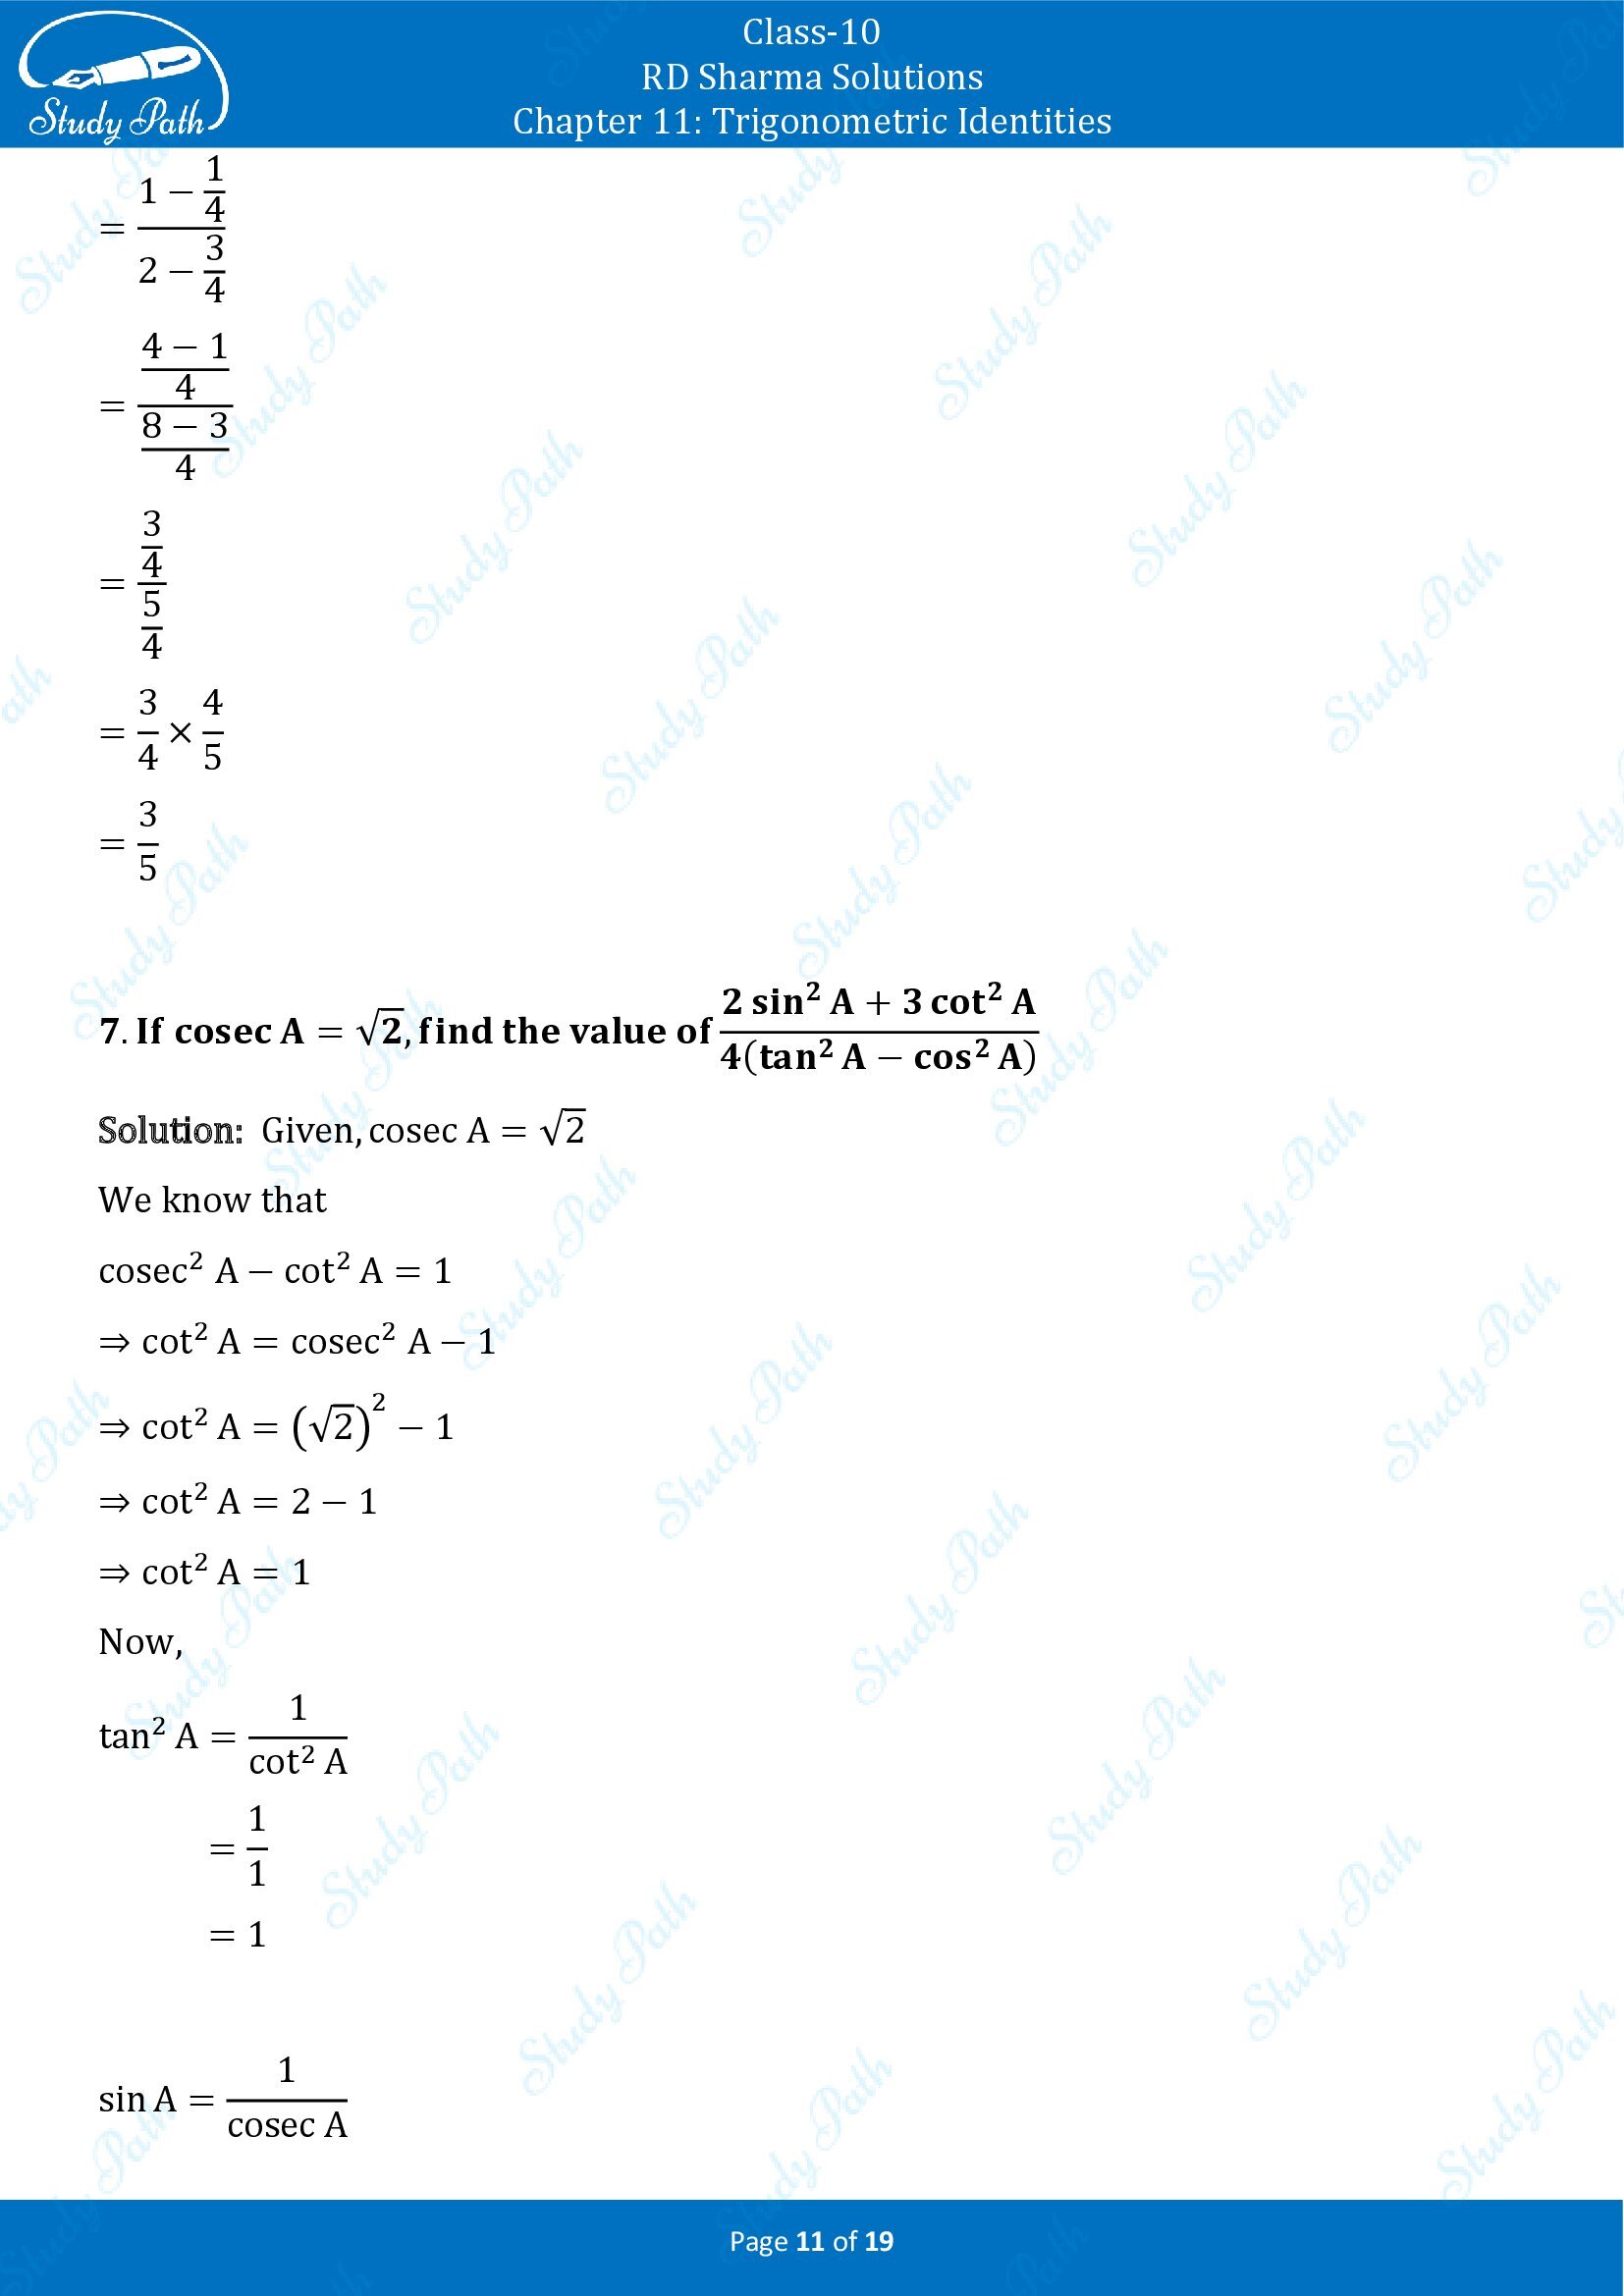 RD Sharma Solutions Class 10 Chapter 11 Trigonometric Identities Exercise 11.2 00011